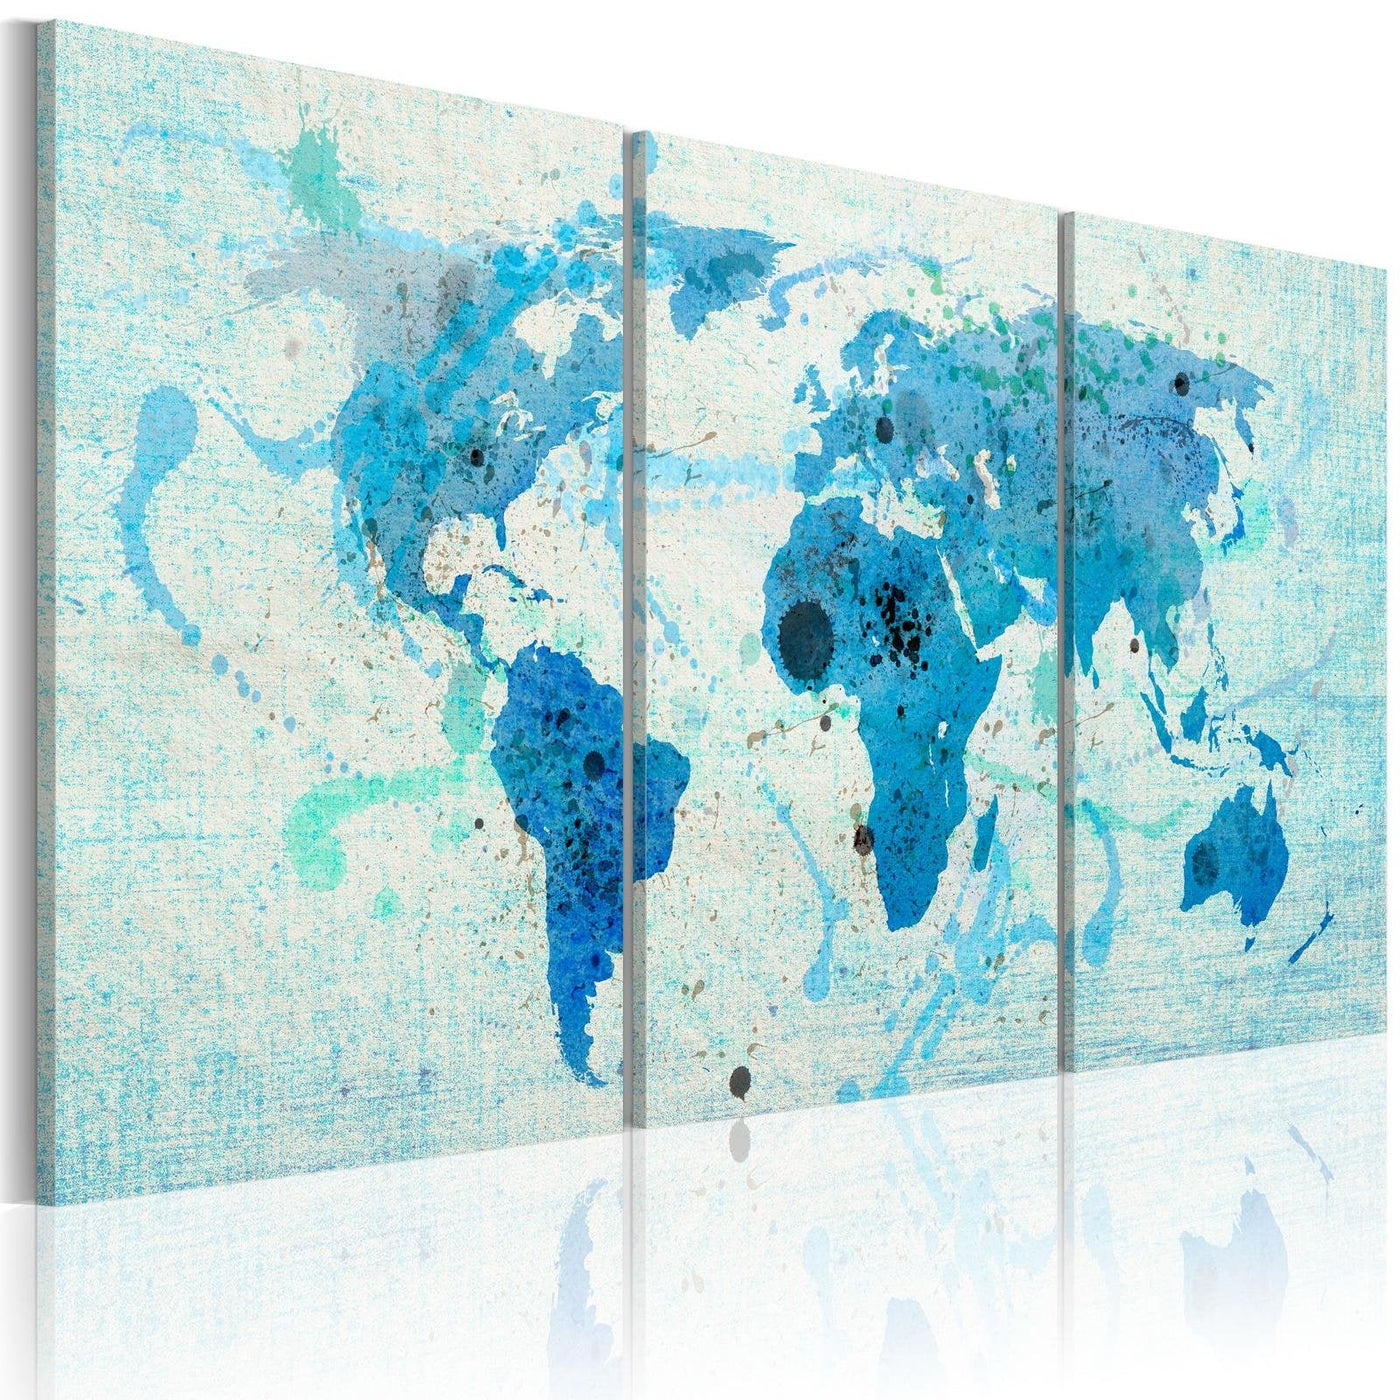 Stretched Canvas World Map Art - Continents Like Oceans-Tiptophomedecor